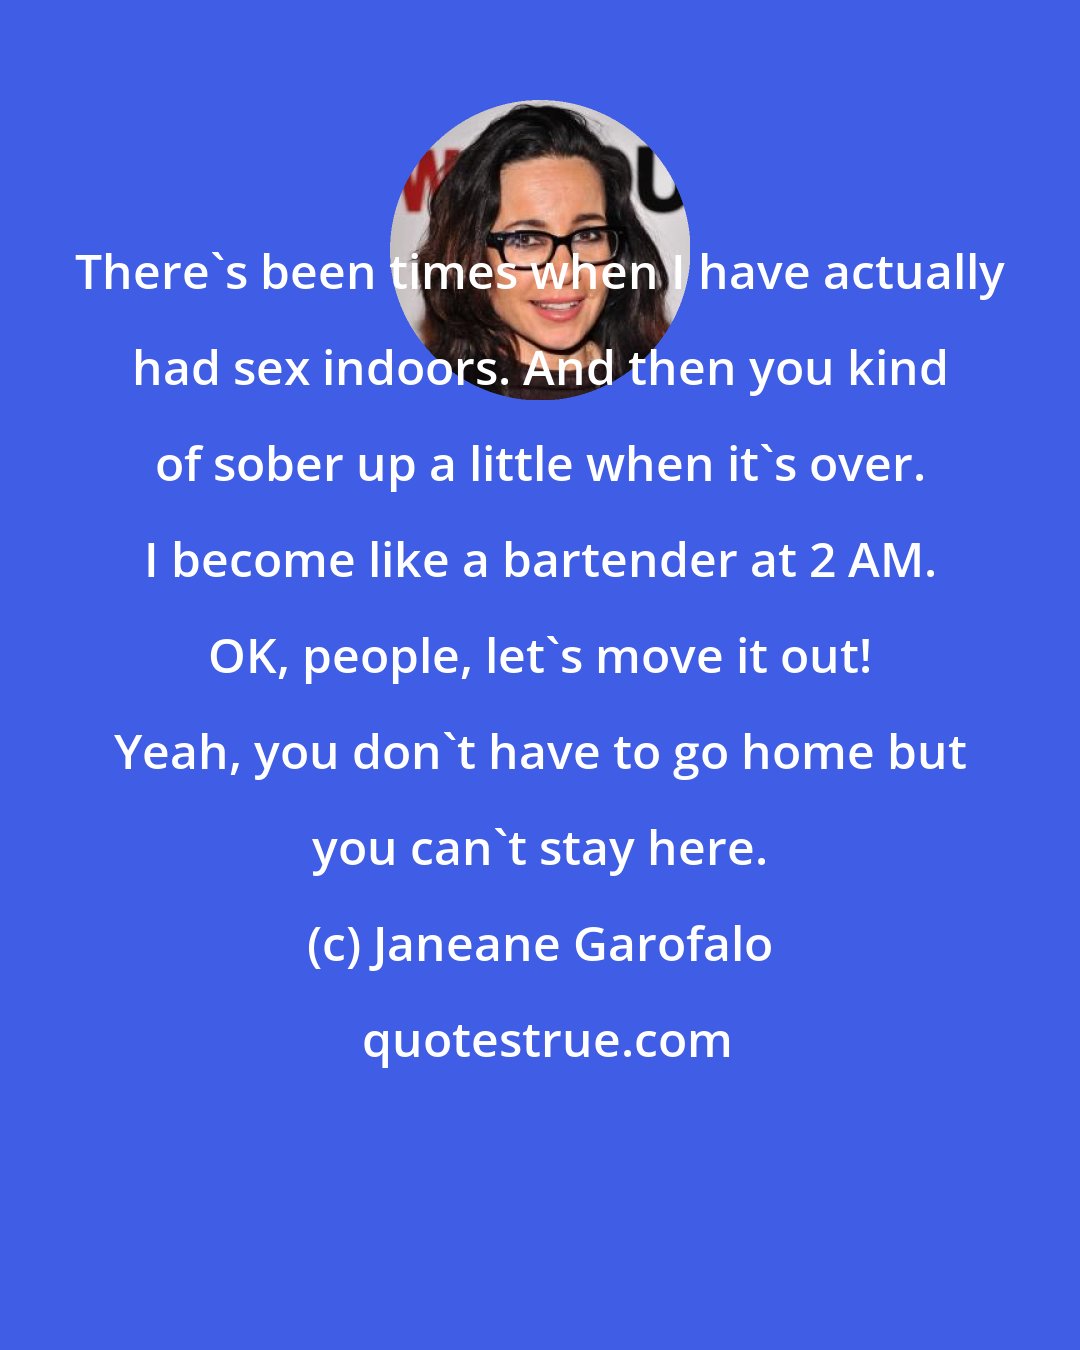 Janeane Garofalo: There's been times when I have actually had sex indoors. And then you kind of sober up a little when it's over. I become like a bartender at 2 AM. OK, people, let's move it out! Yeah, you don't have to go home but you can't stay here.